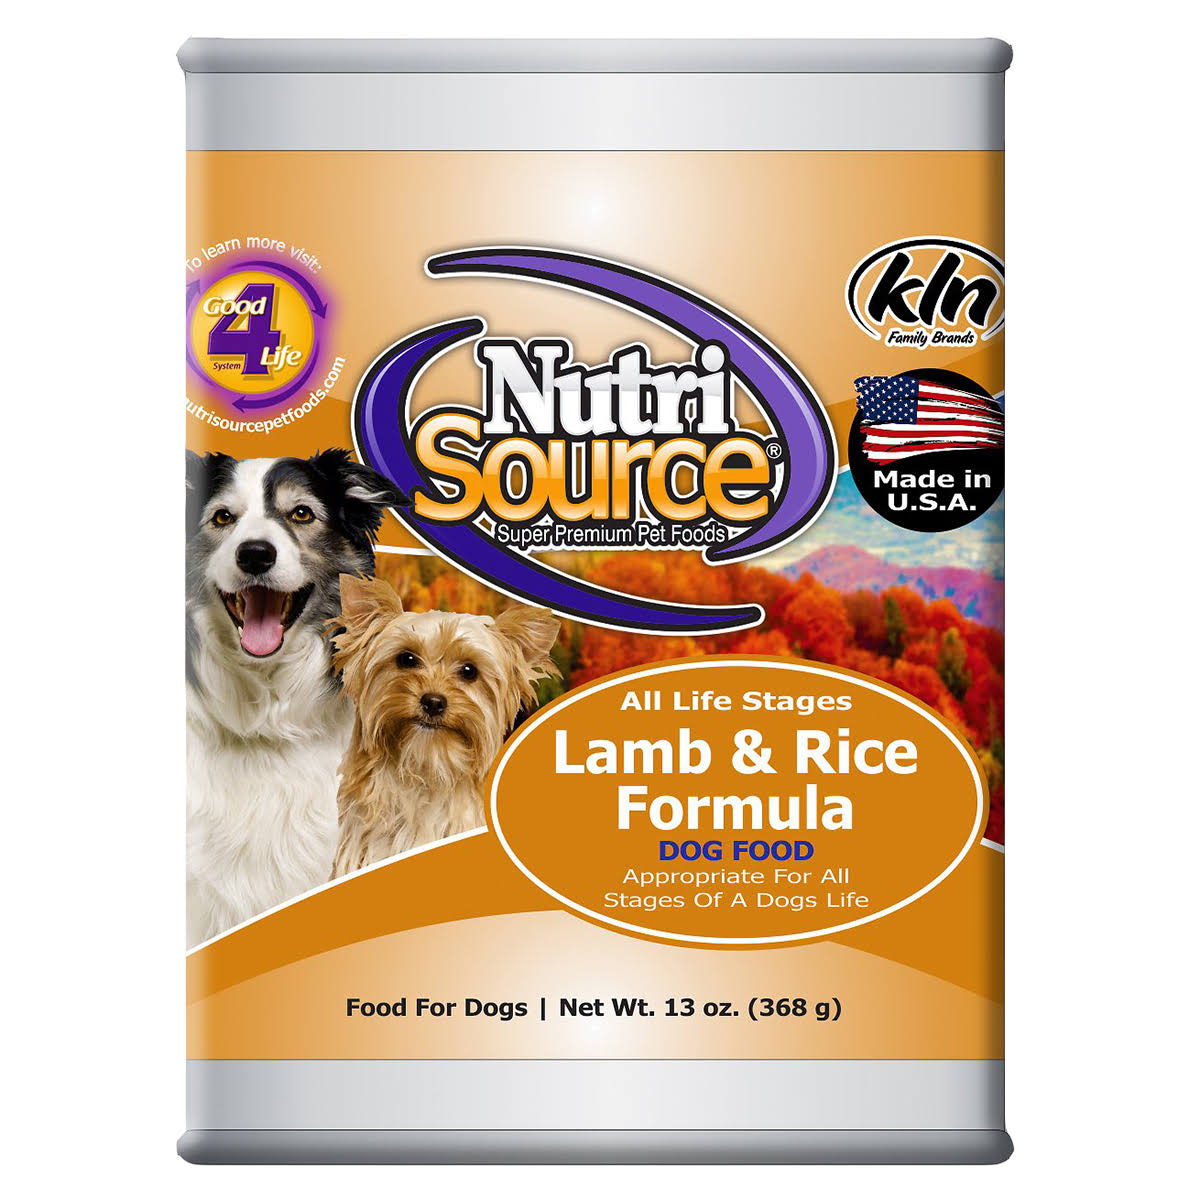 Nutrisource Canned Dog Food - Lamb and Rice, 13oz